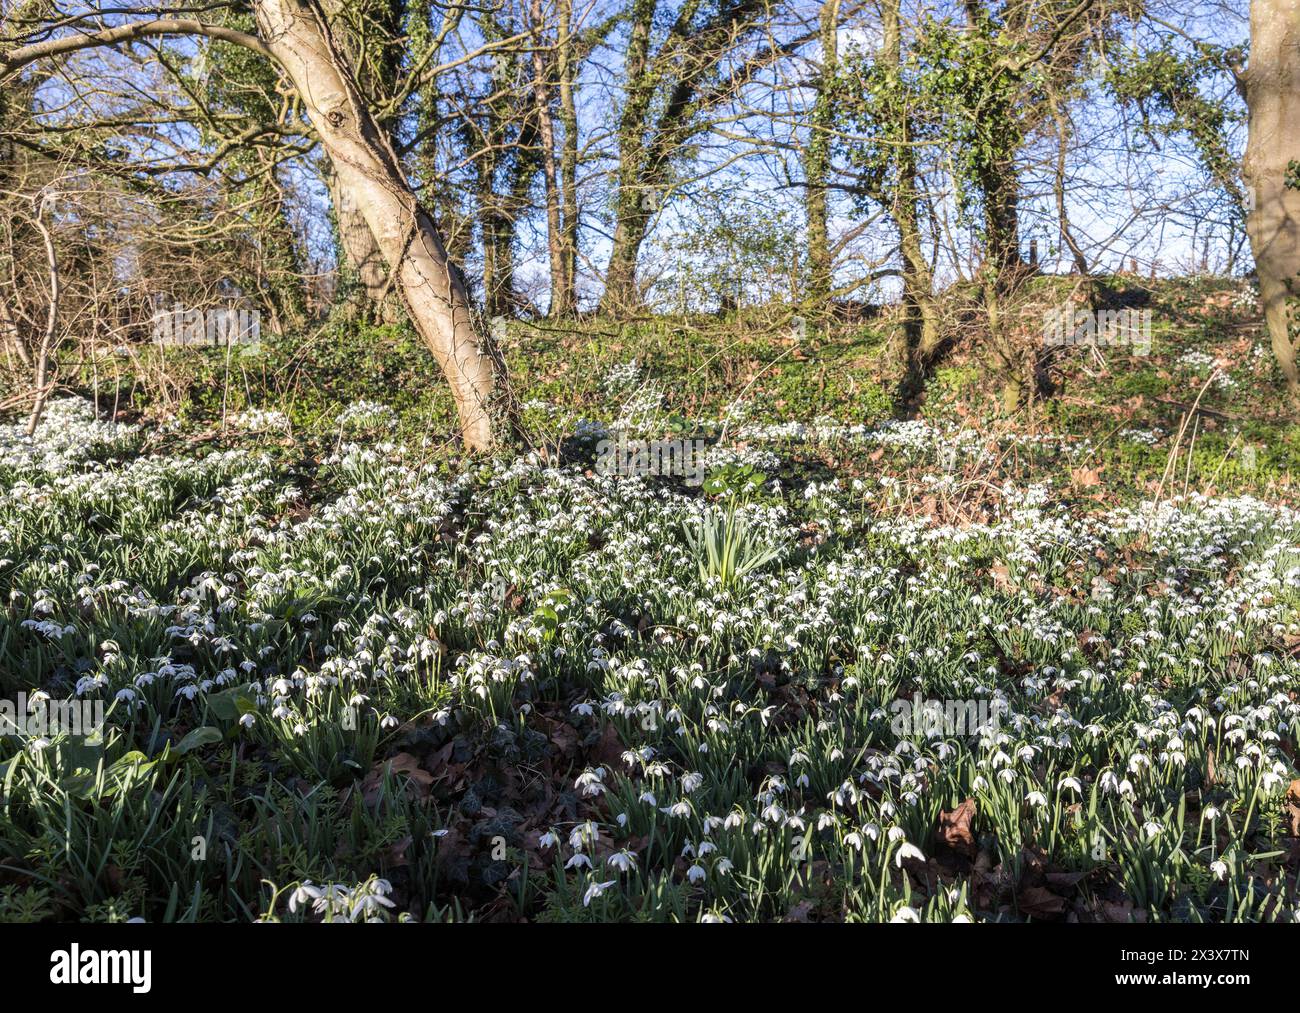 Snowdrops, Galanthus nivalis, in woodland hedgerow, Canons Ashby, England, UK Stock Photo